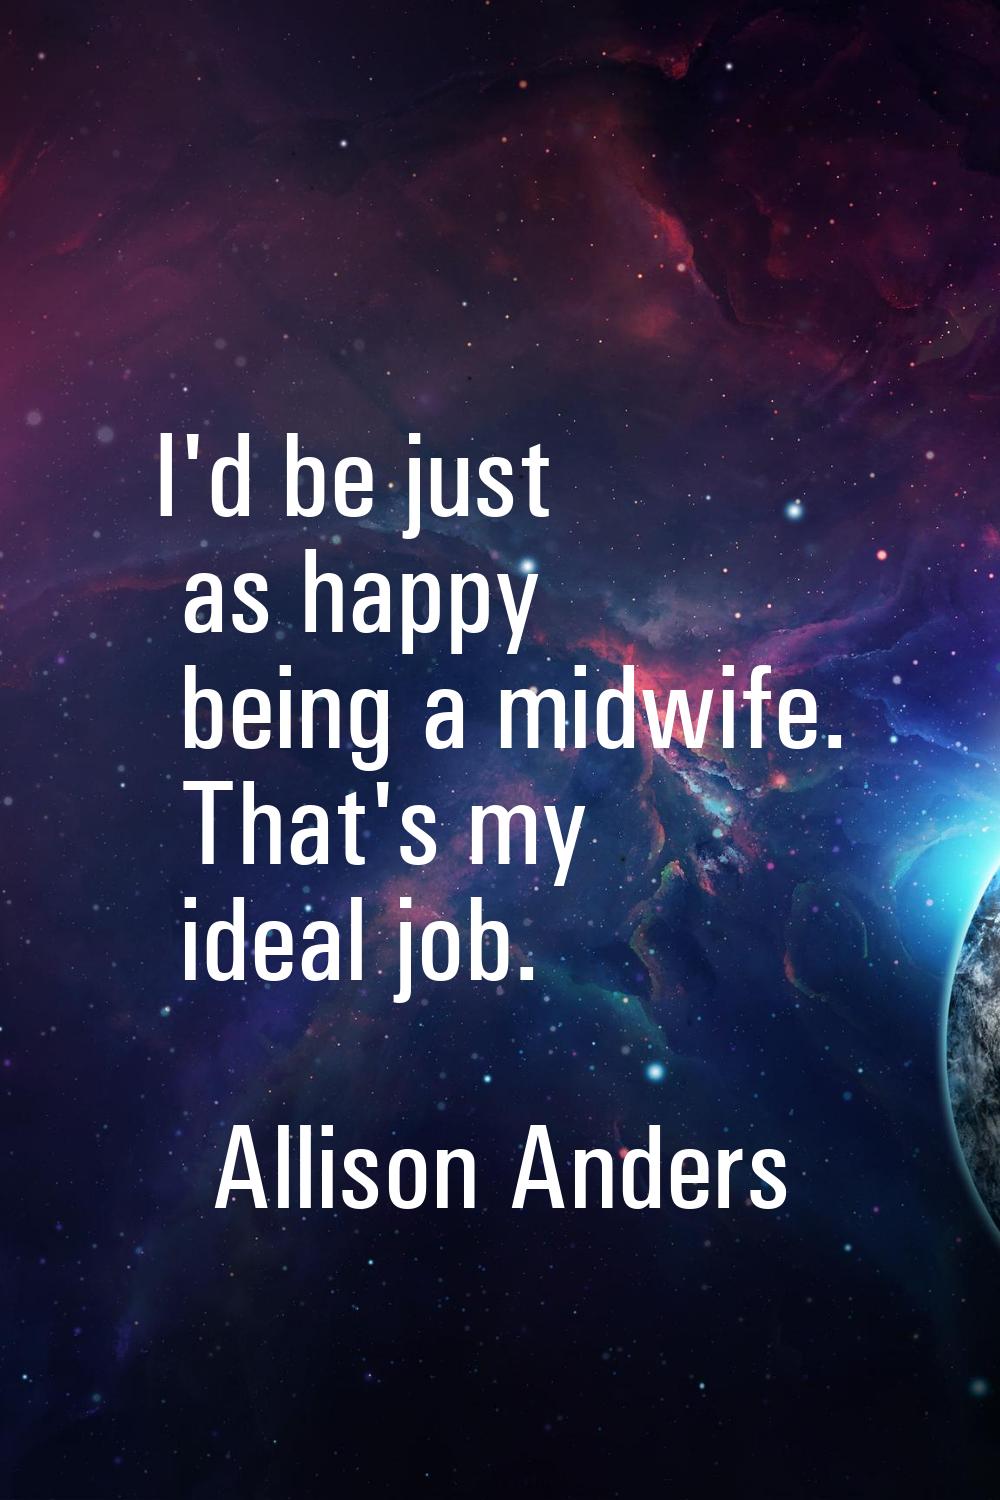 I'd be just as happy being a midwife. That's my ideal job.